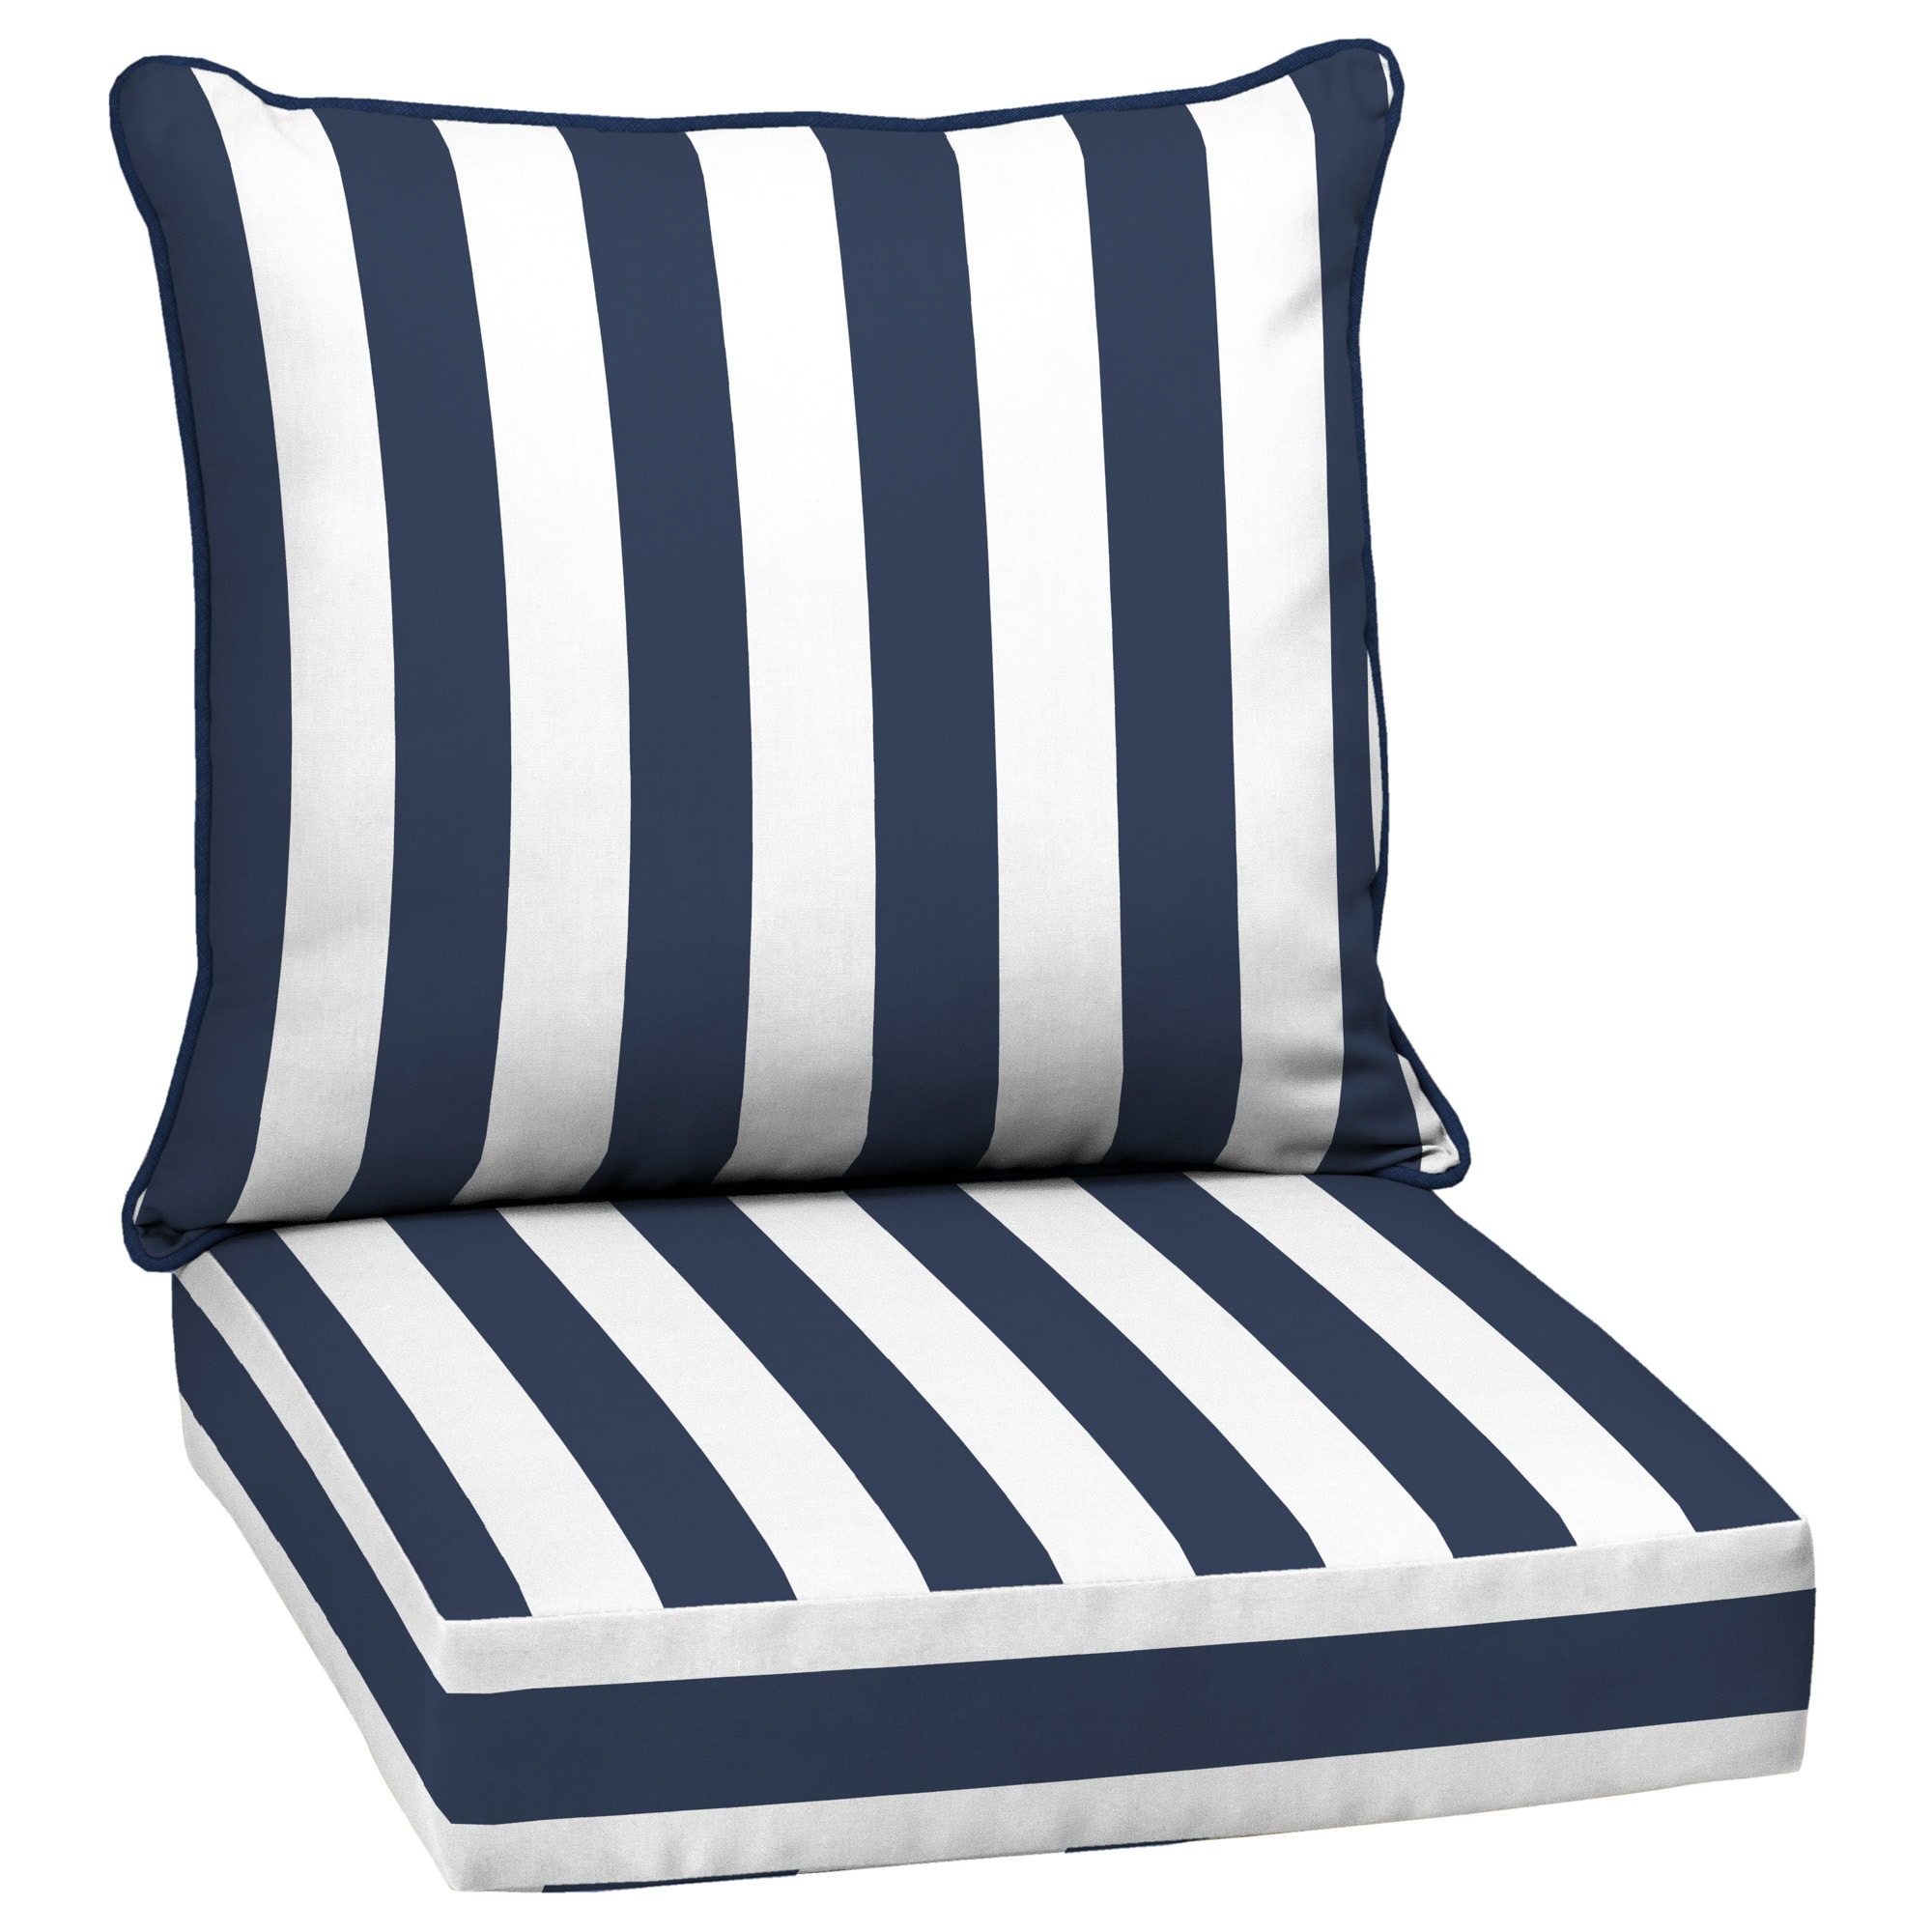 Blue Outdoor Furniture Cushions